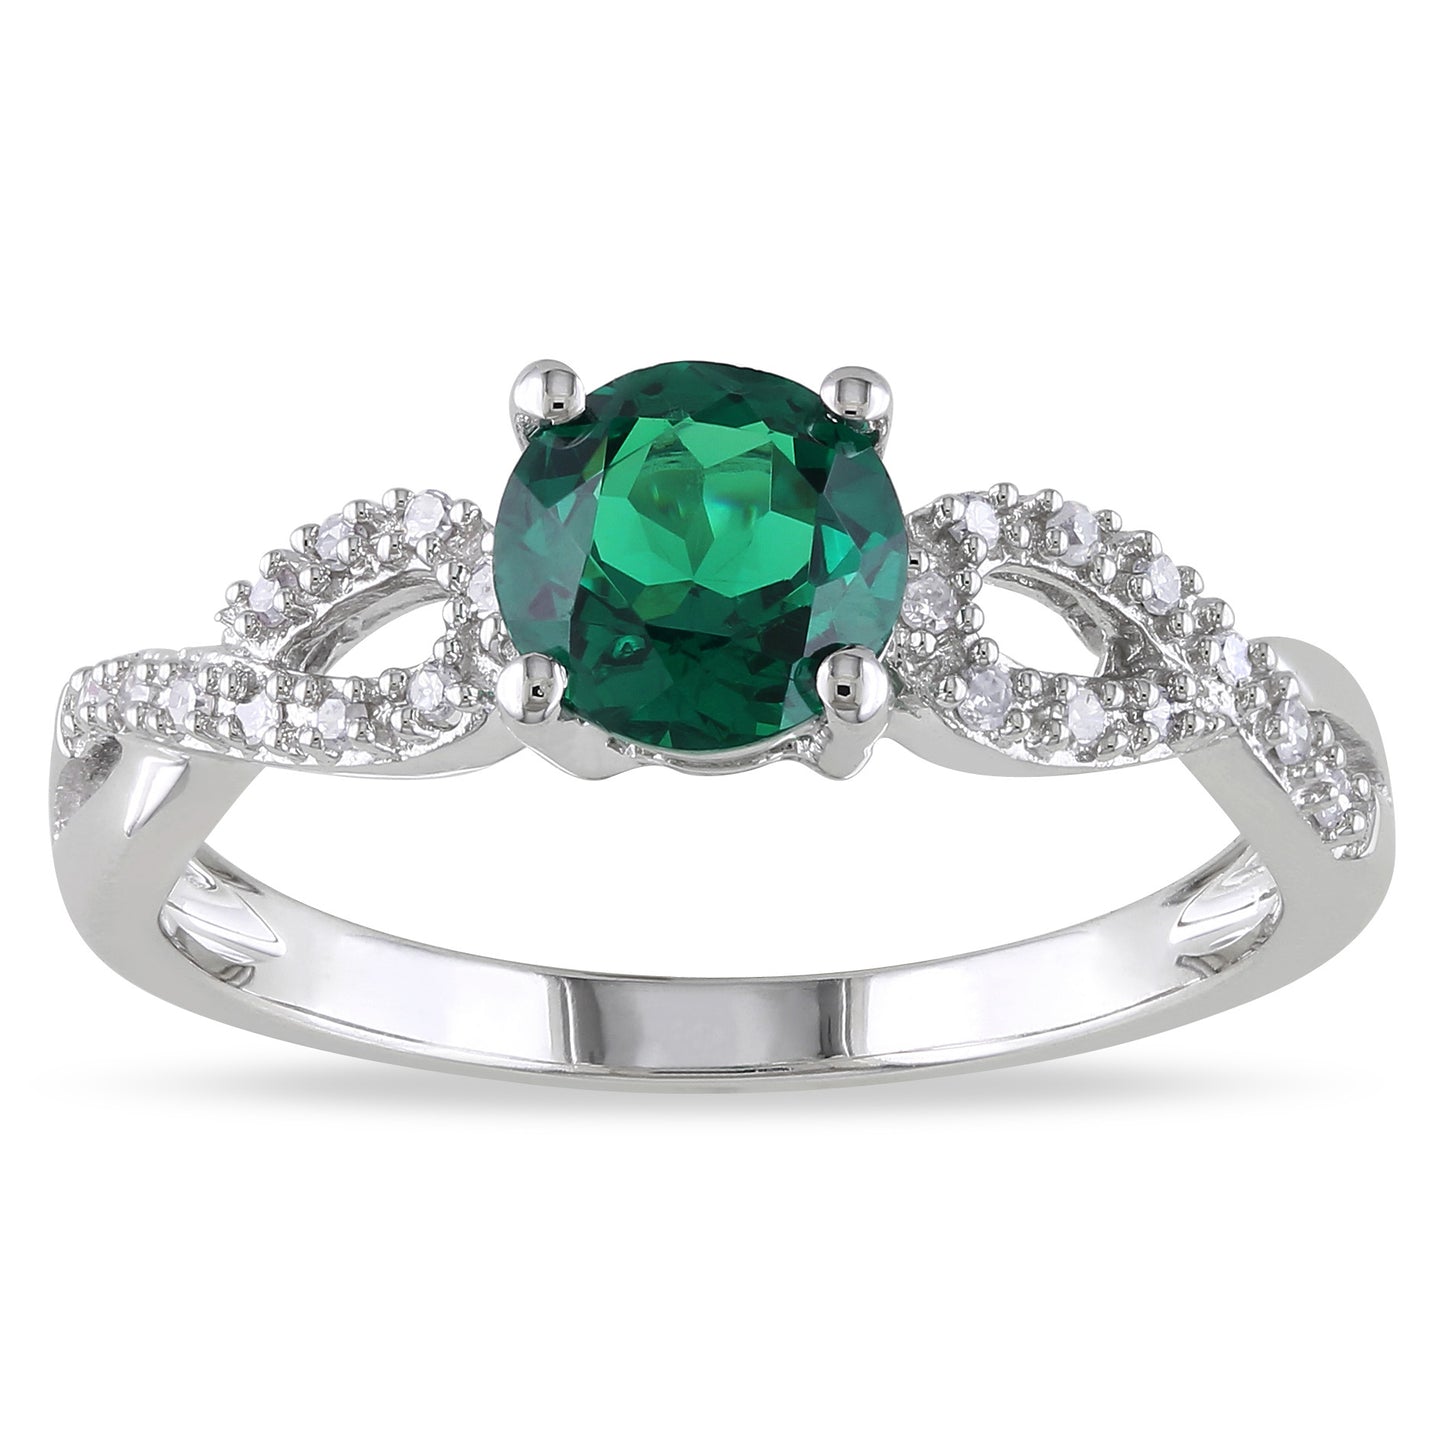 Round Cut Created Emerald & Diamond Infinity Ring in 10k White Gold